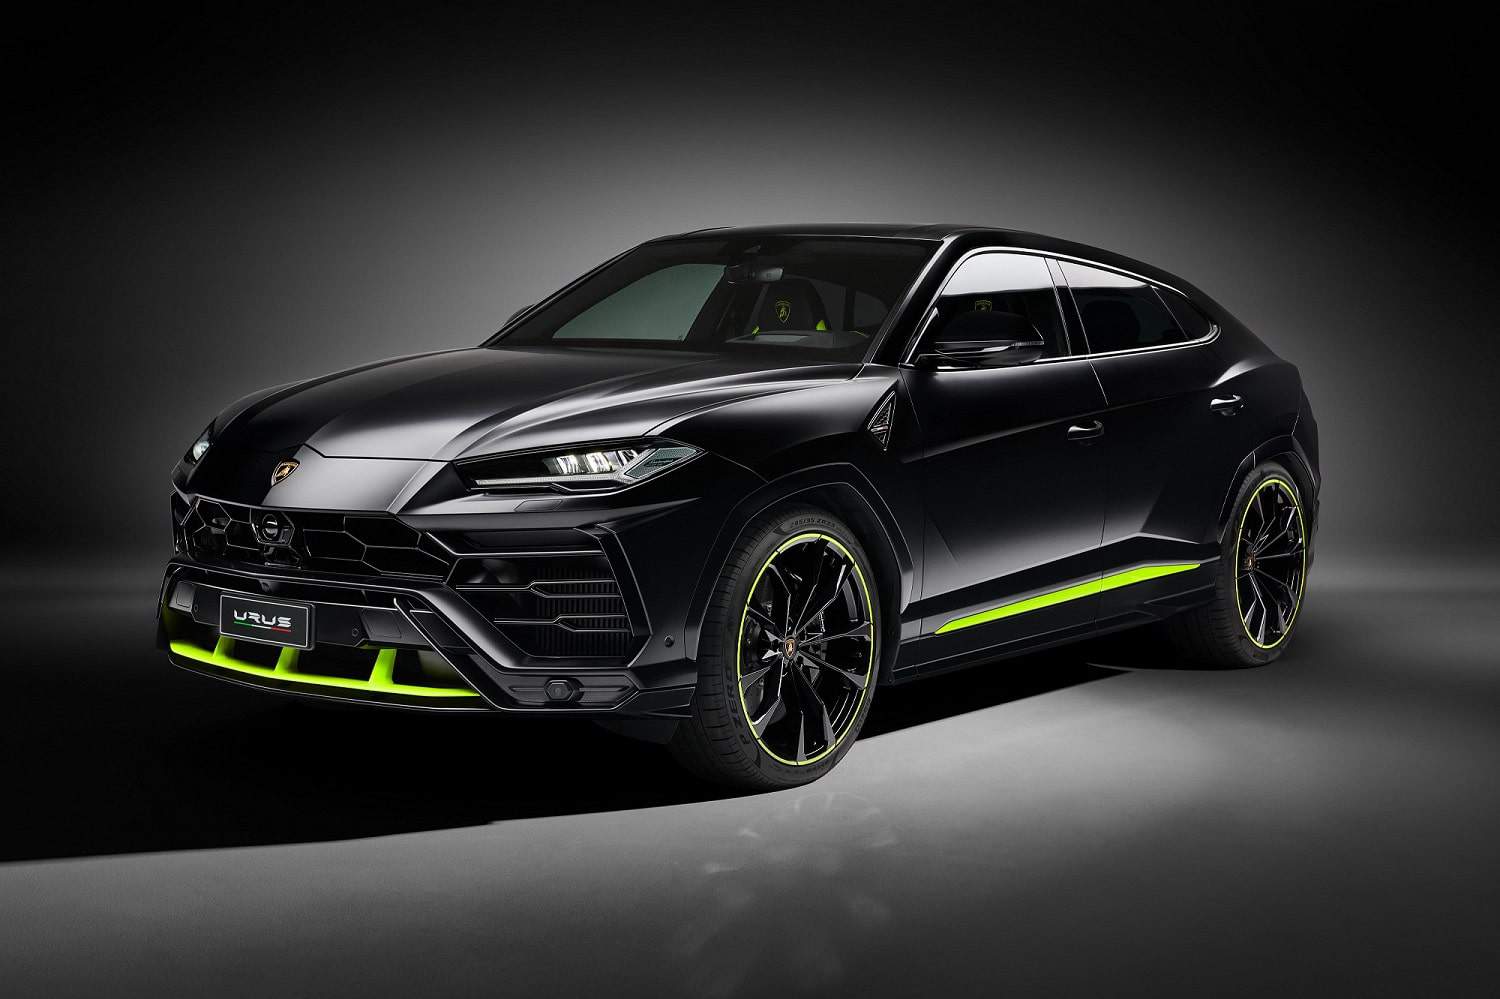 Customizing your Urus just got better with the new Graphite Capsule by Automobili Lamborghini